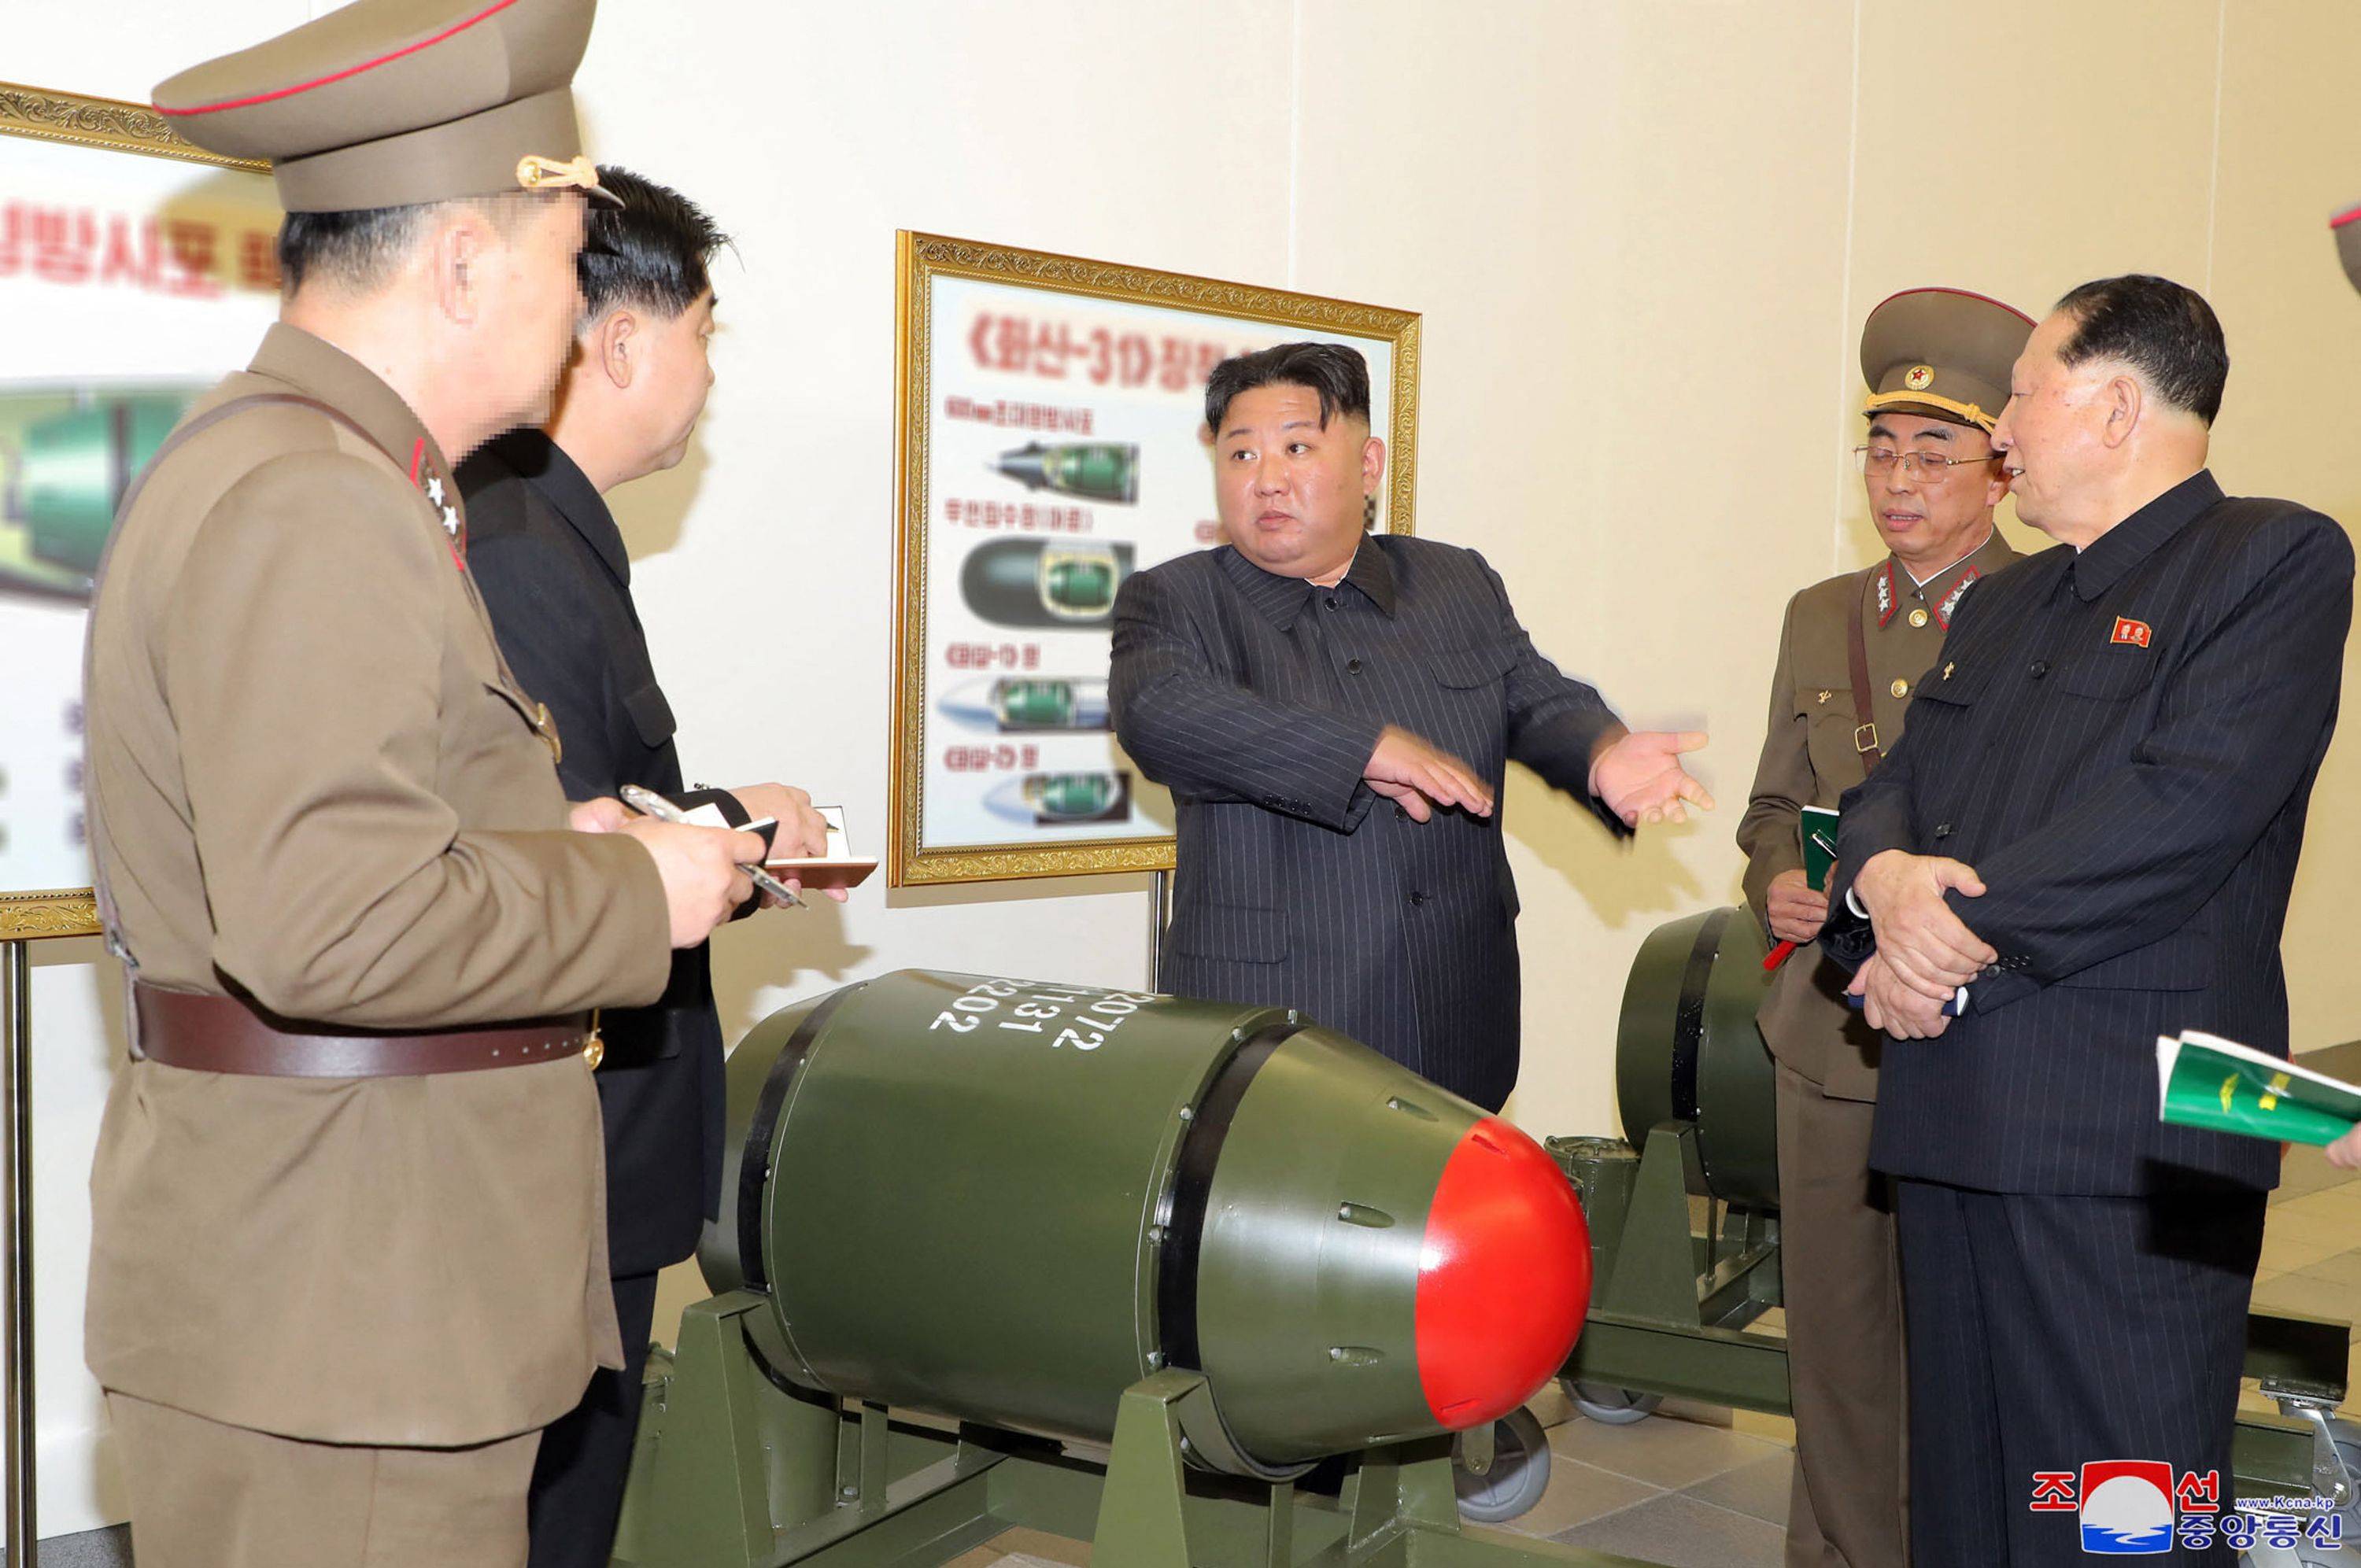 North Korean leader Kim Jong Un inspects a nuclear weapons project as a new, smaller nuclear warhead sits in front of him at an undisclosed location in the country, in this image released Tuesday. In the background, a poster appears to show how the green warheads can be mounted on a variety of missiles. | KCNA / KNS / VIA AFP-JIJI